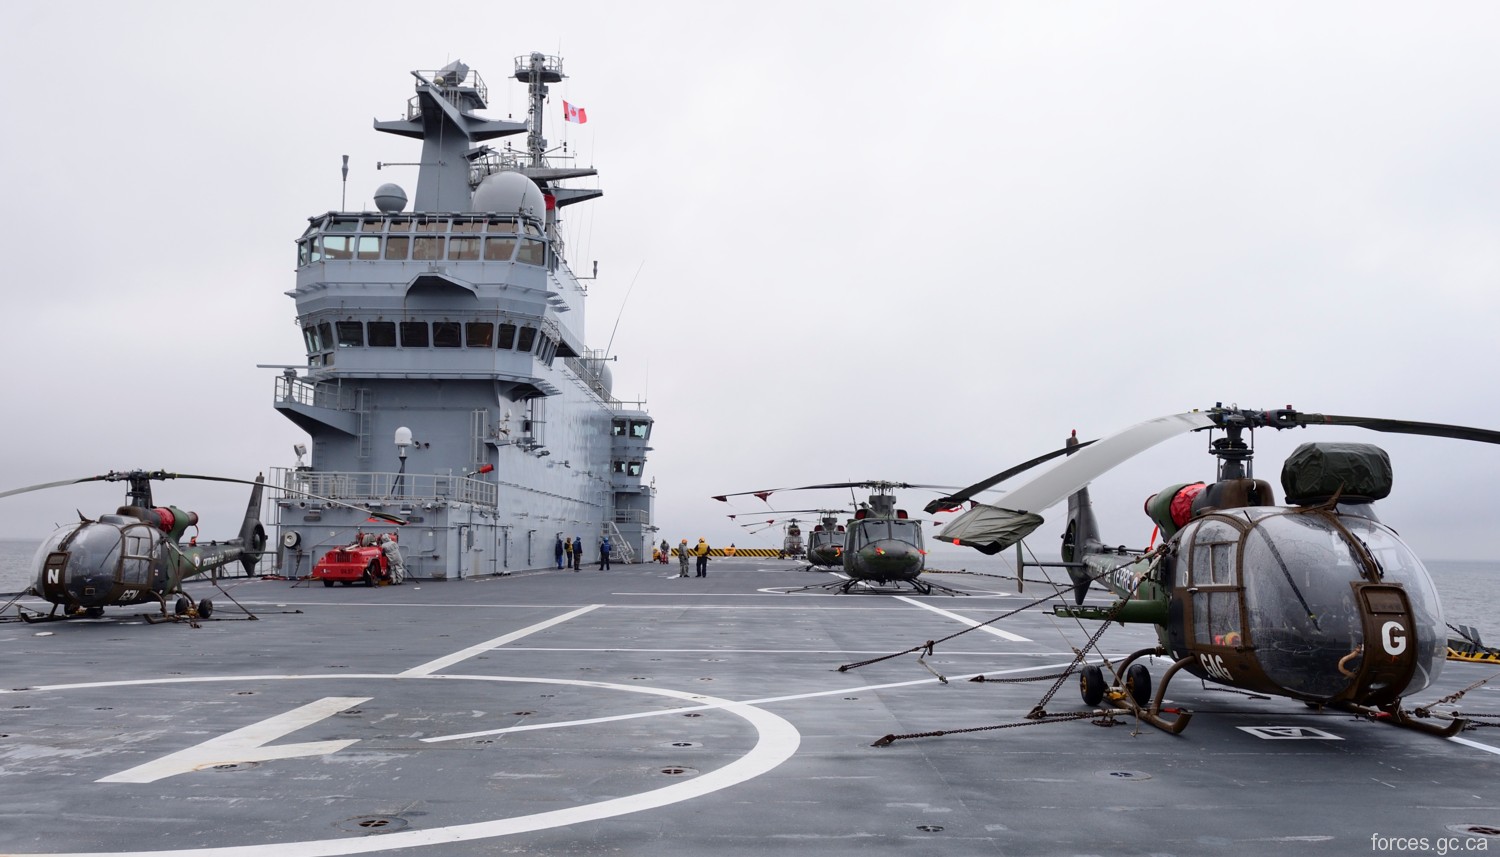 l-9013 fs mistral amphibious assault command ship french navy marine nationale 42 helicopter flight deck